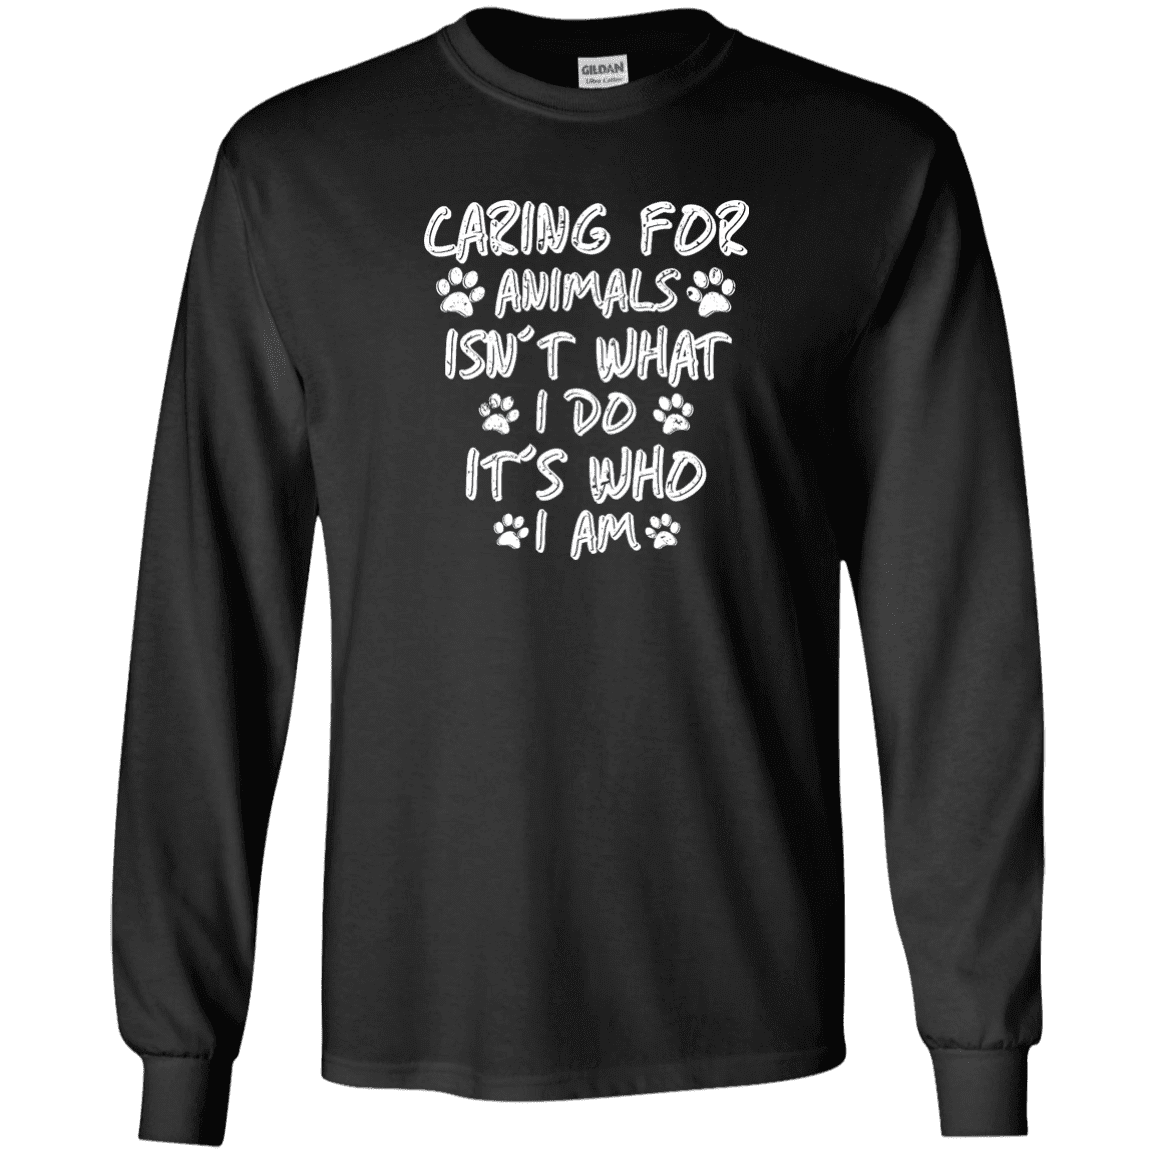 Caring For Animals - Long Sleeve T Shirt.